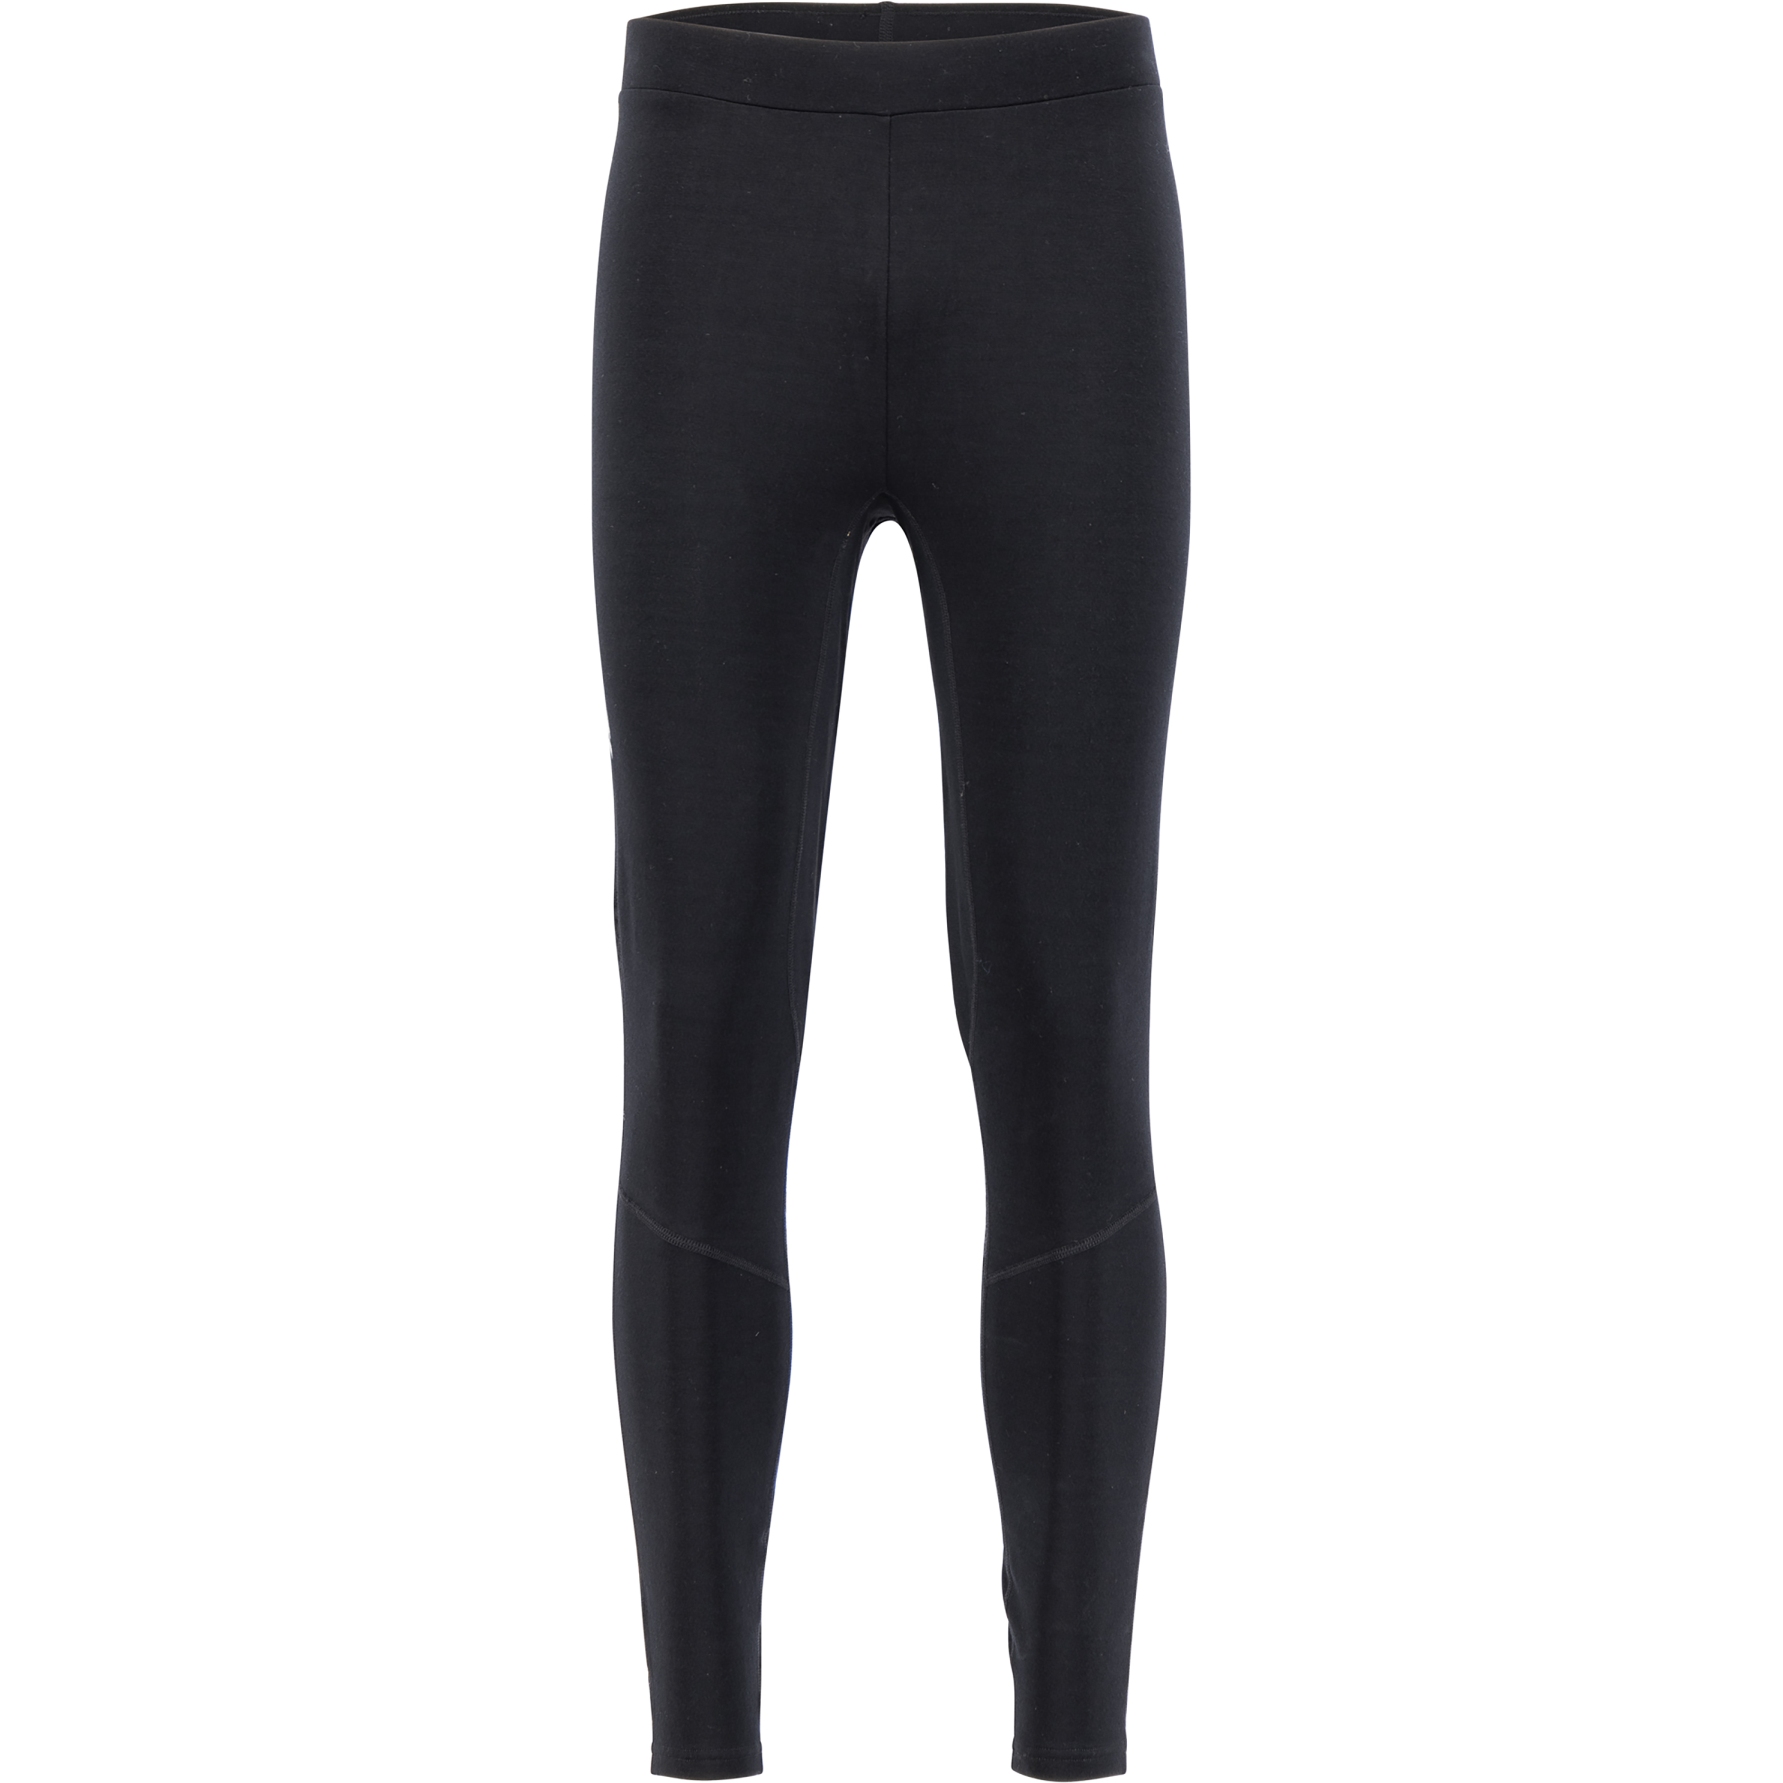 Picture of Ulvang Gira Warm Tights Men - Black